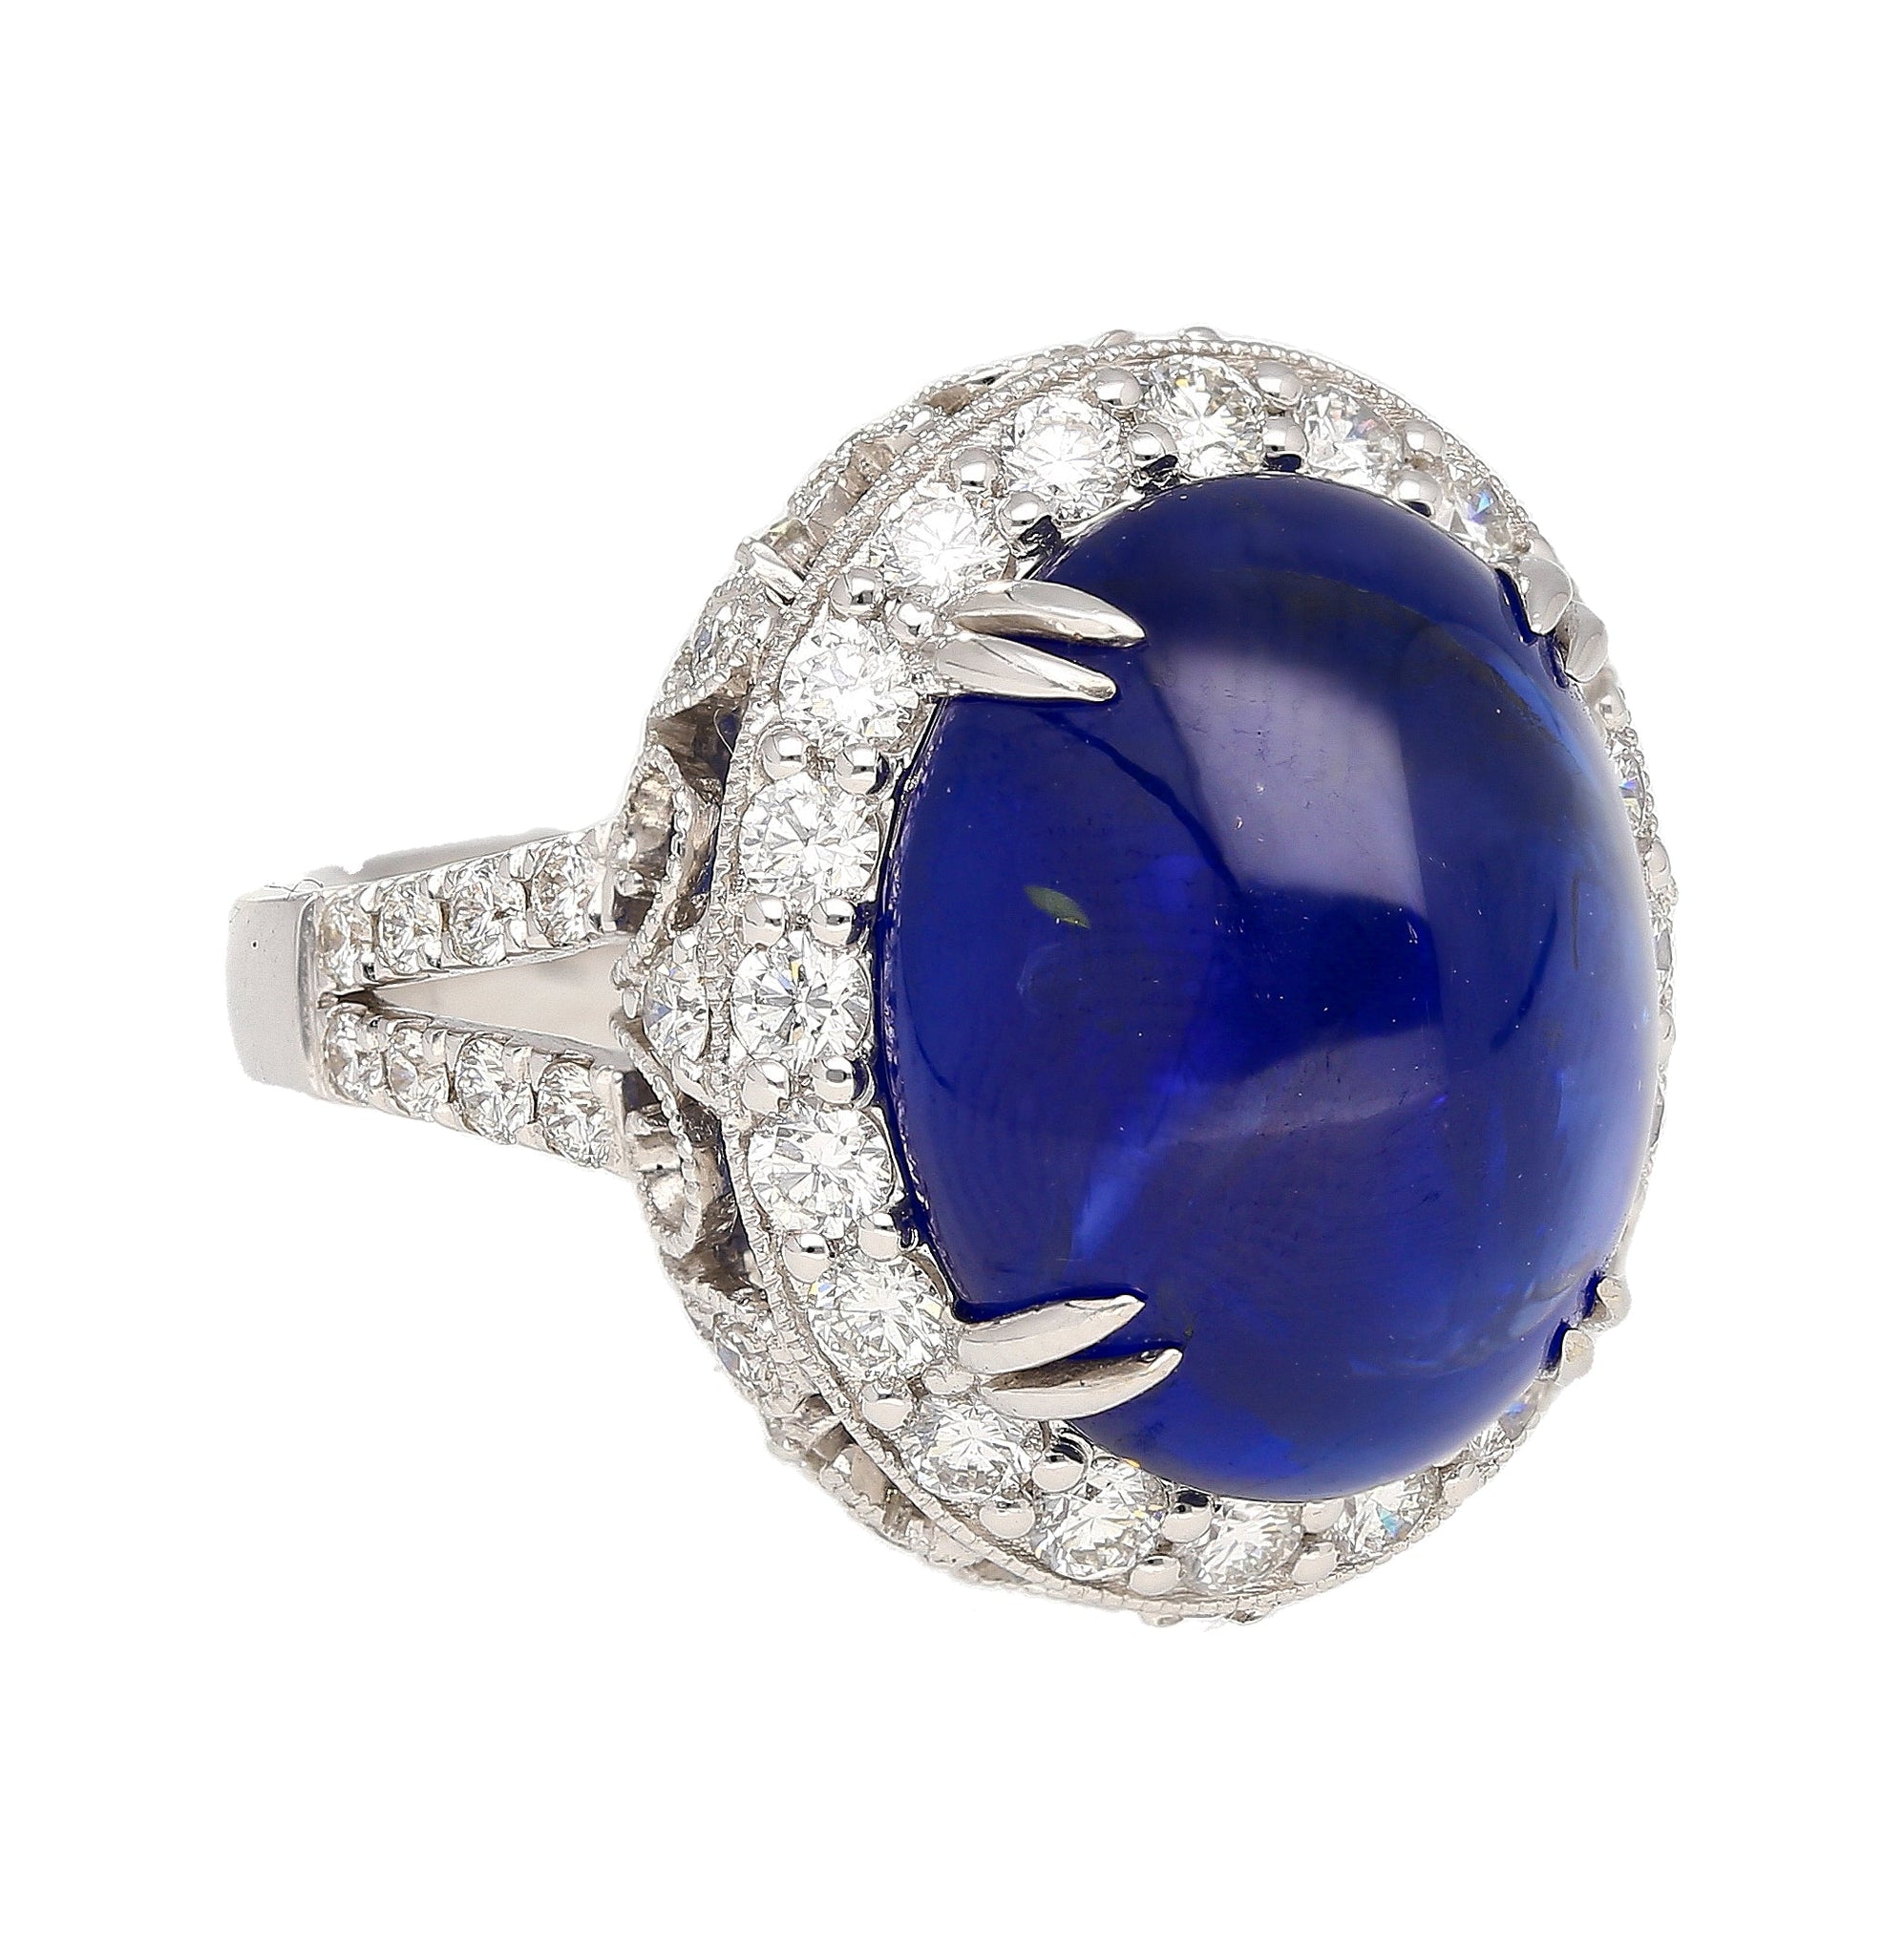 AGL Certified 16.68 Carat Cabochon Cut Ceylon Blue Sapphire Ring with Diamond Halo and Filigree Set 18K White Gold